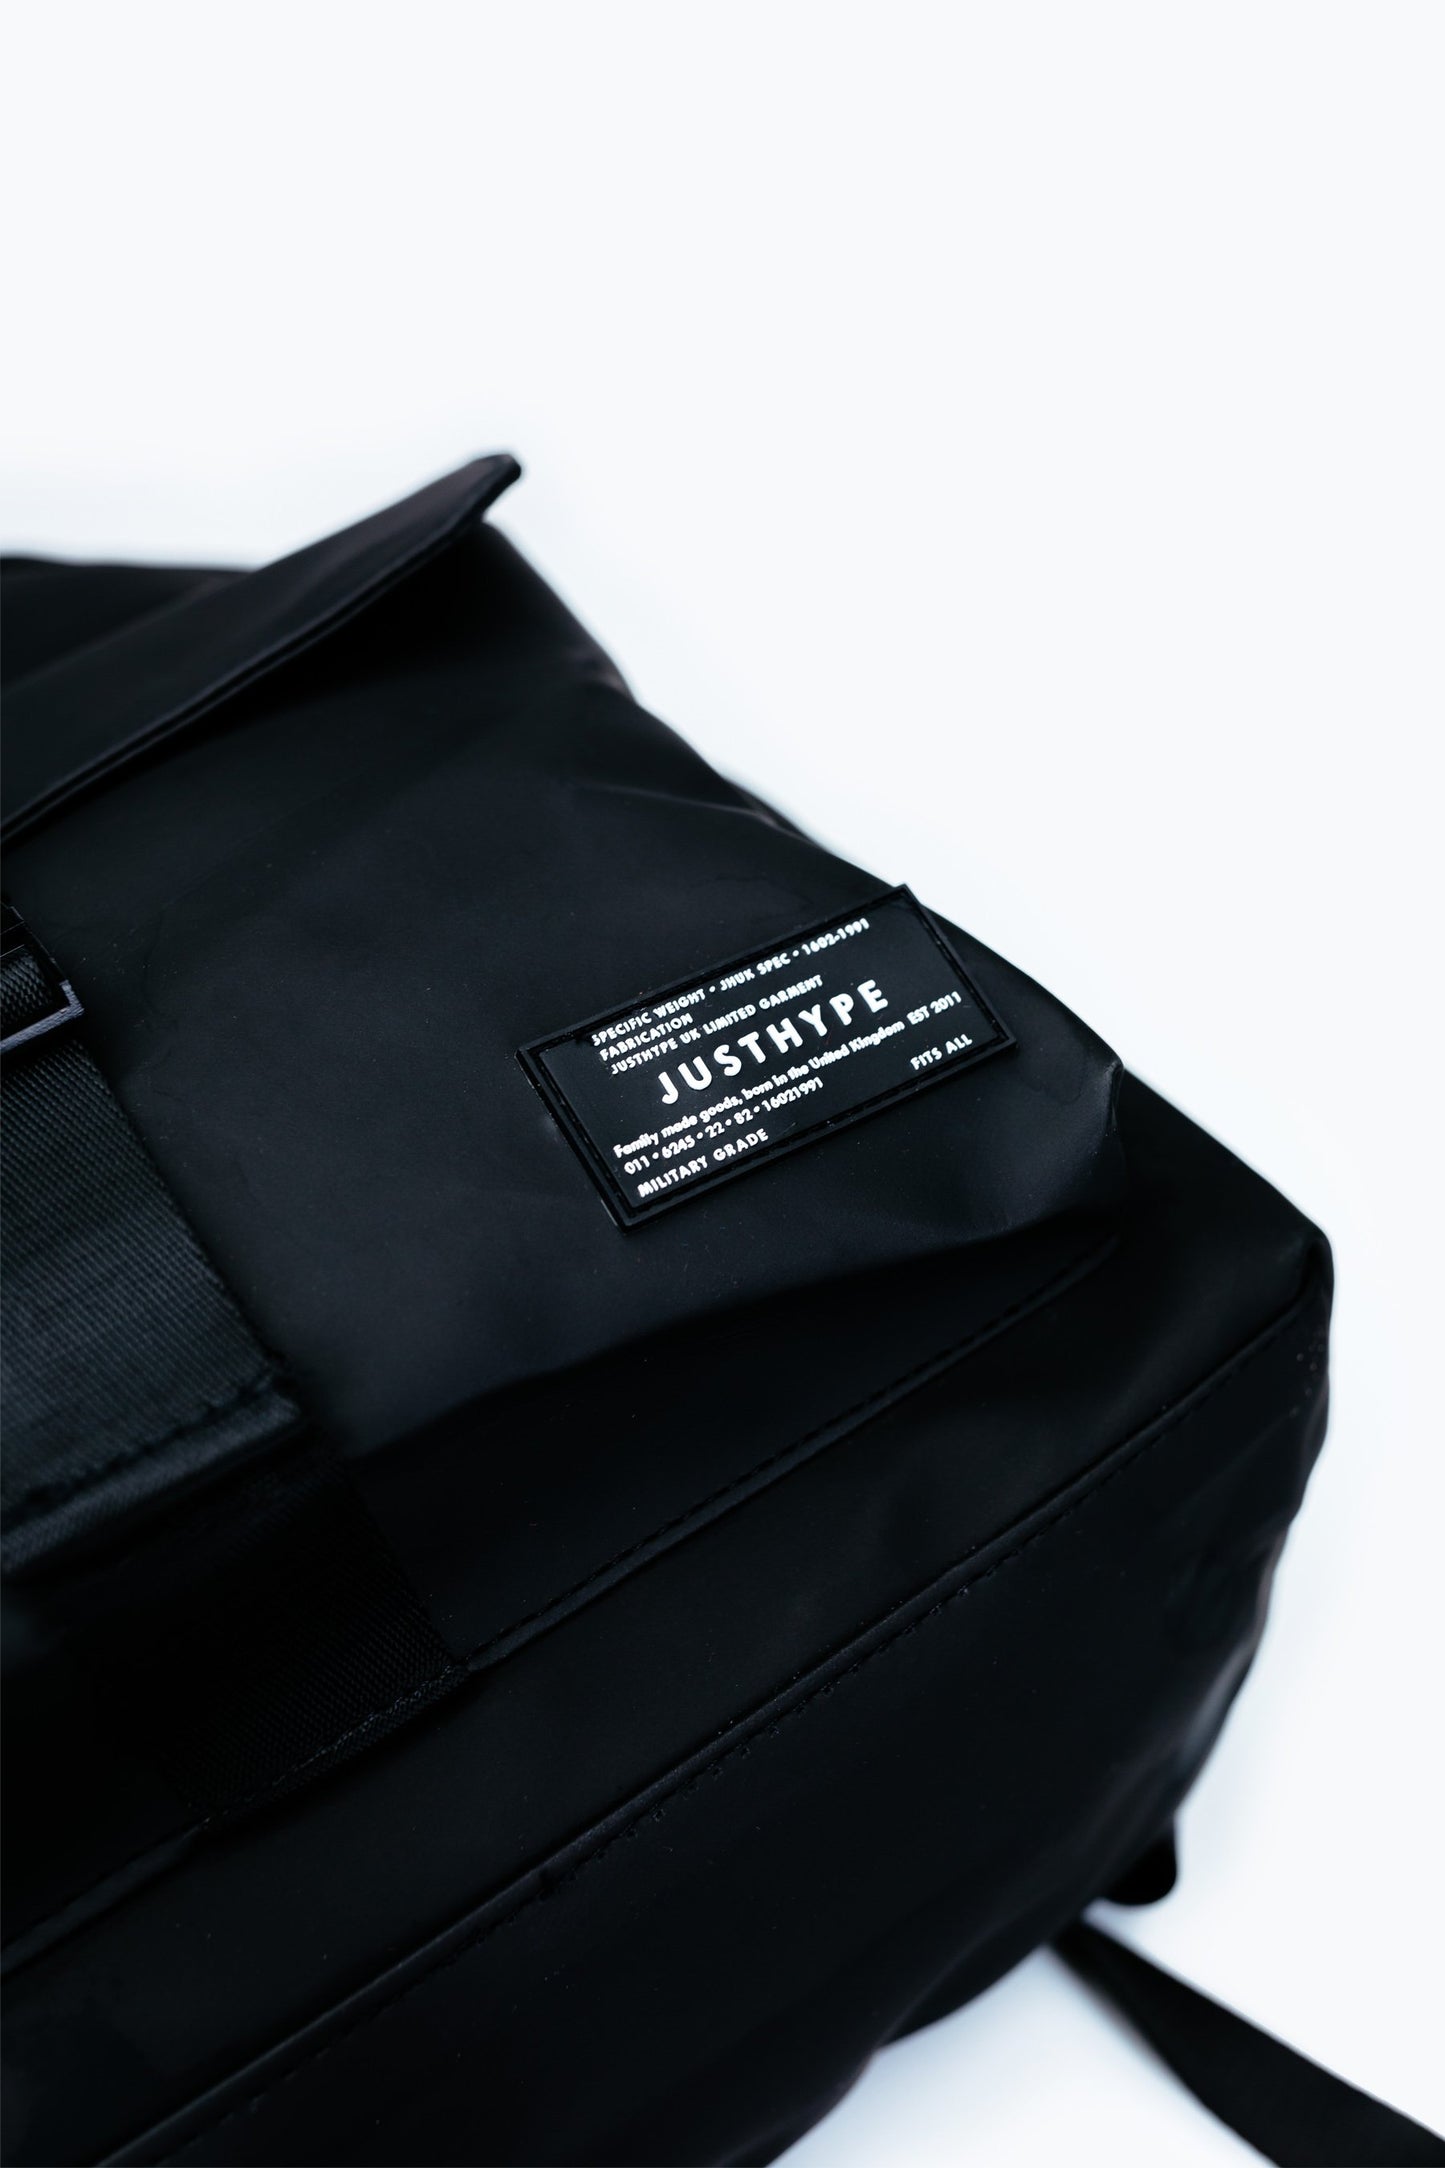 Hype Black Leather Civil Backpack